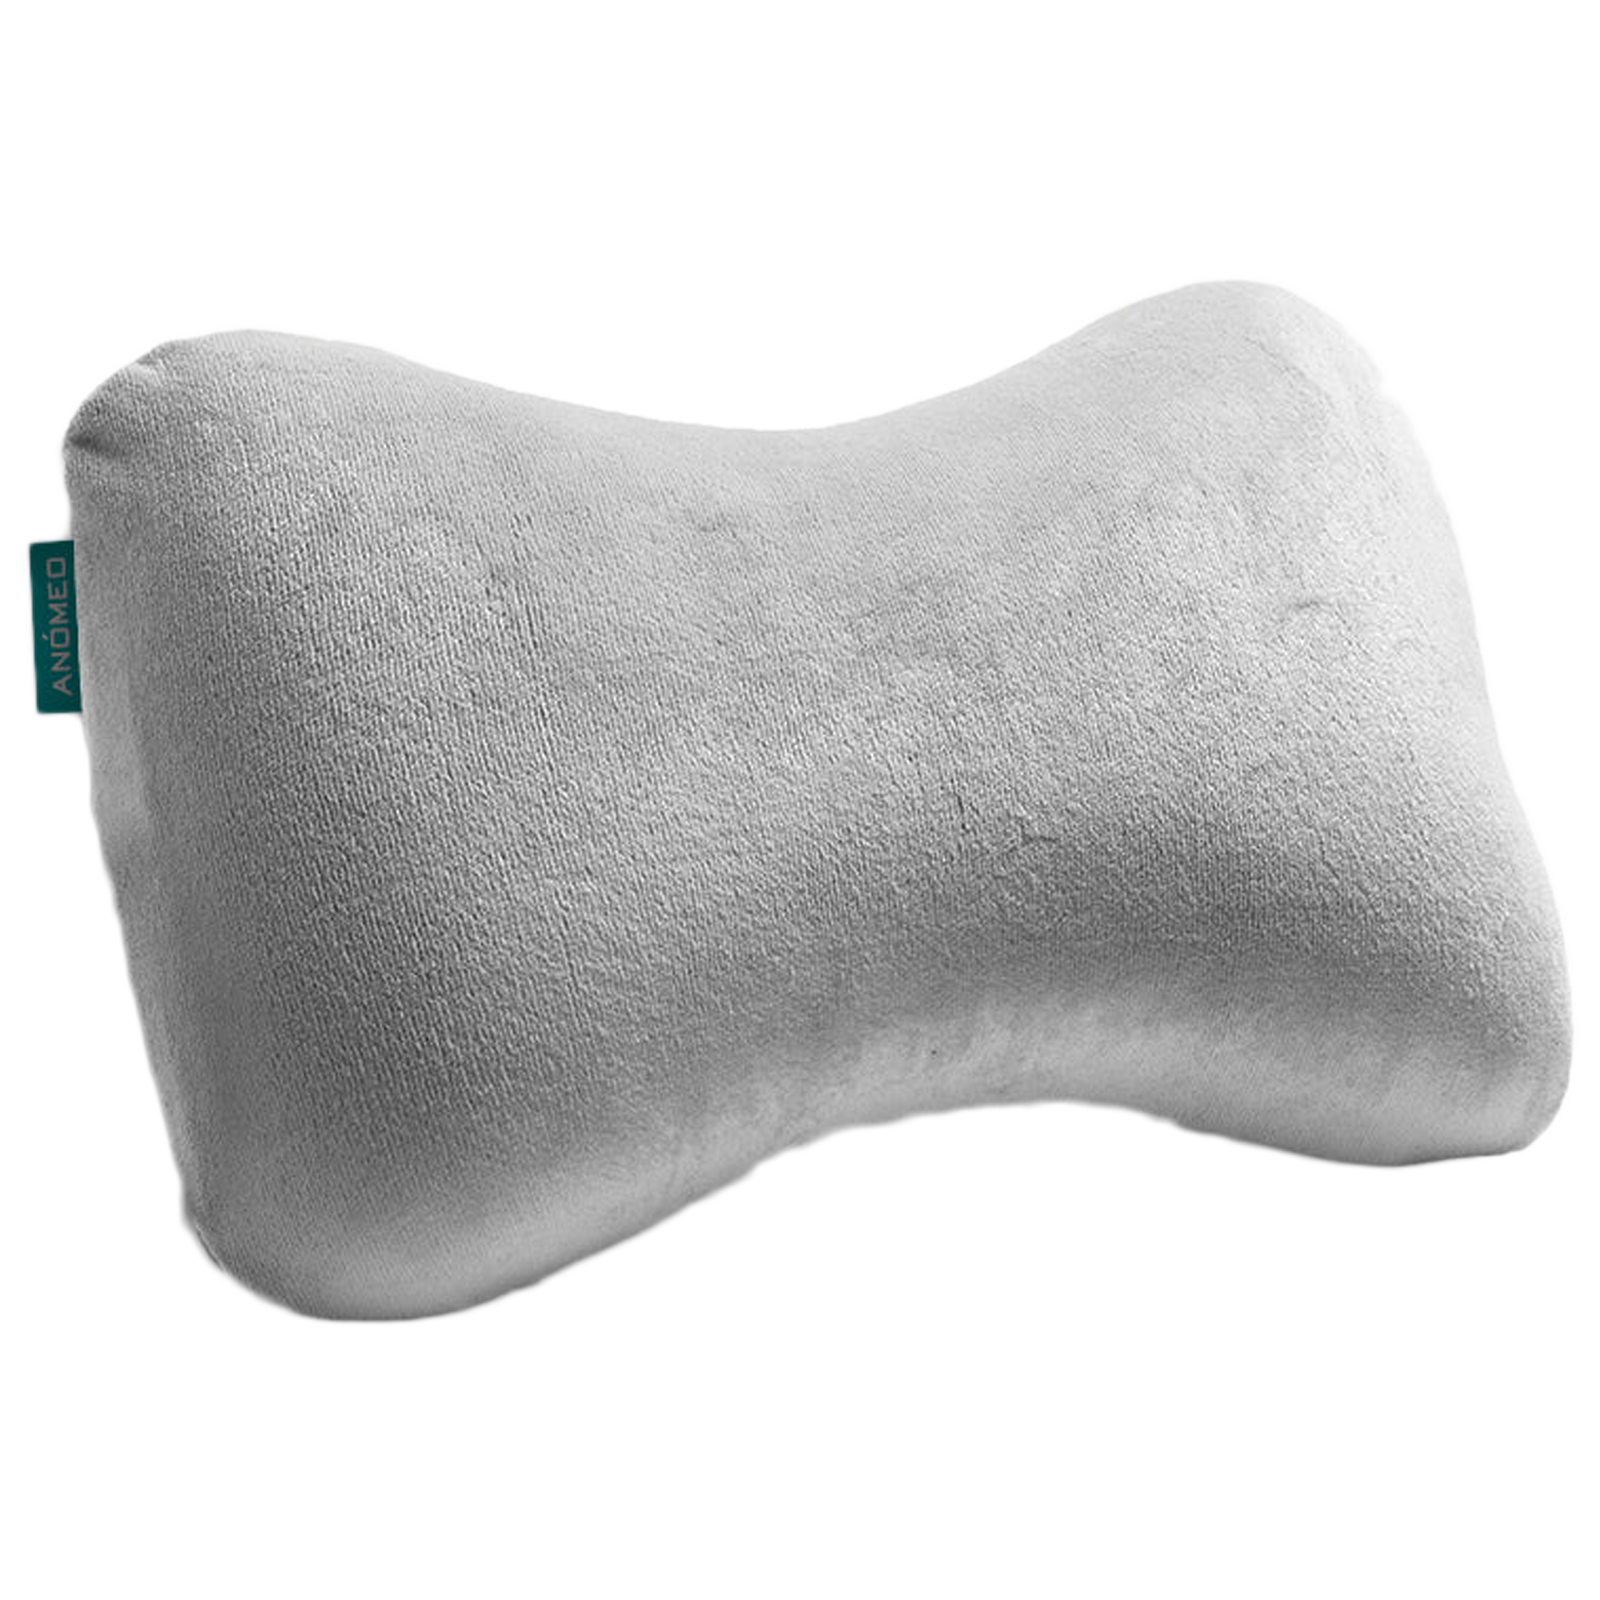 Anomeo Memory Foam Neck Pillow (Hypoallergenic and Portable, 2404, Grey)